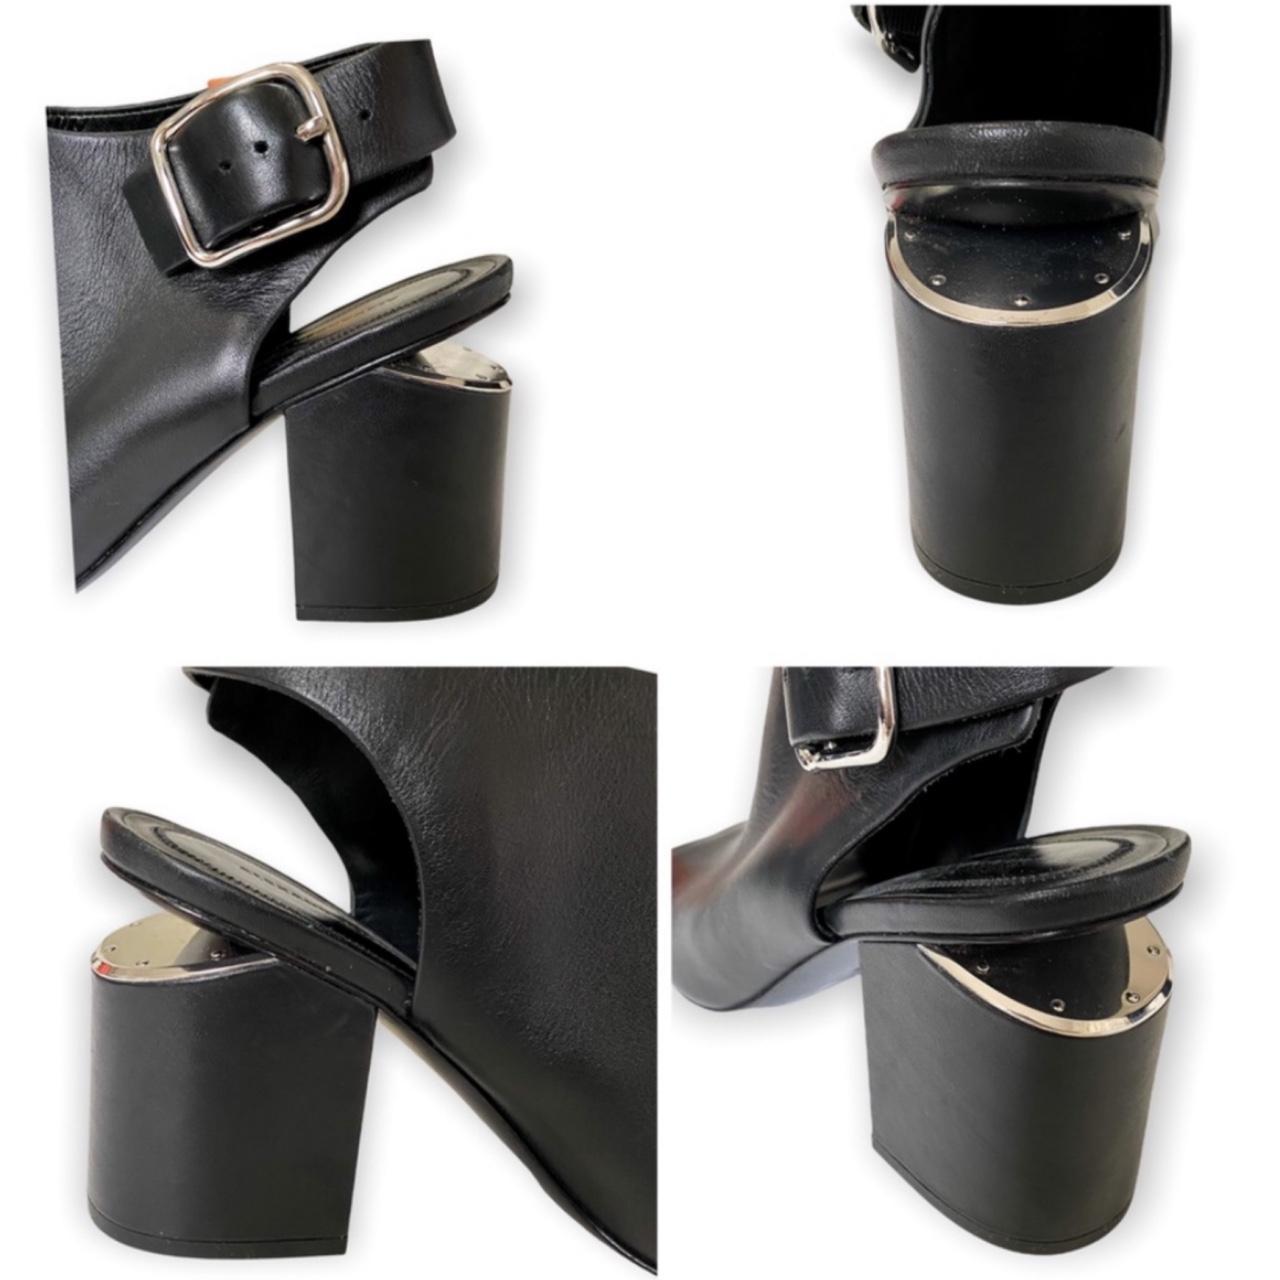 Product Image 3 - Never worn
Alexander Wang Black Leather